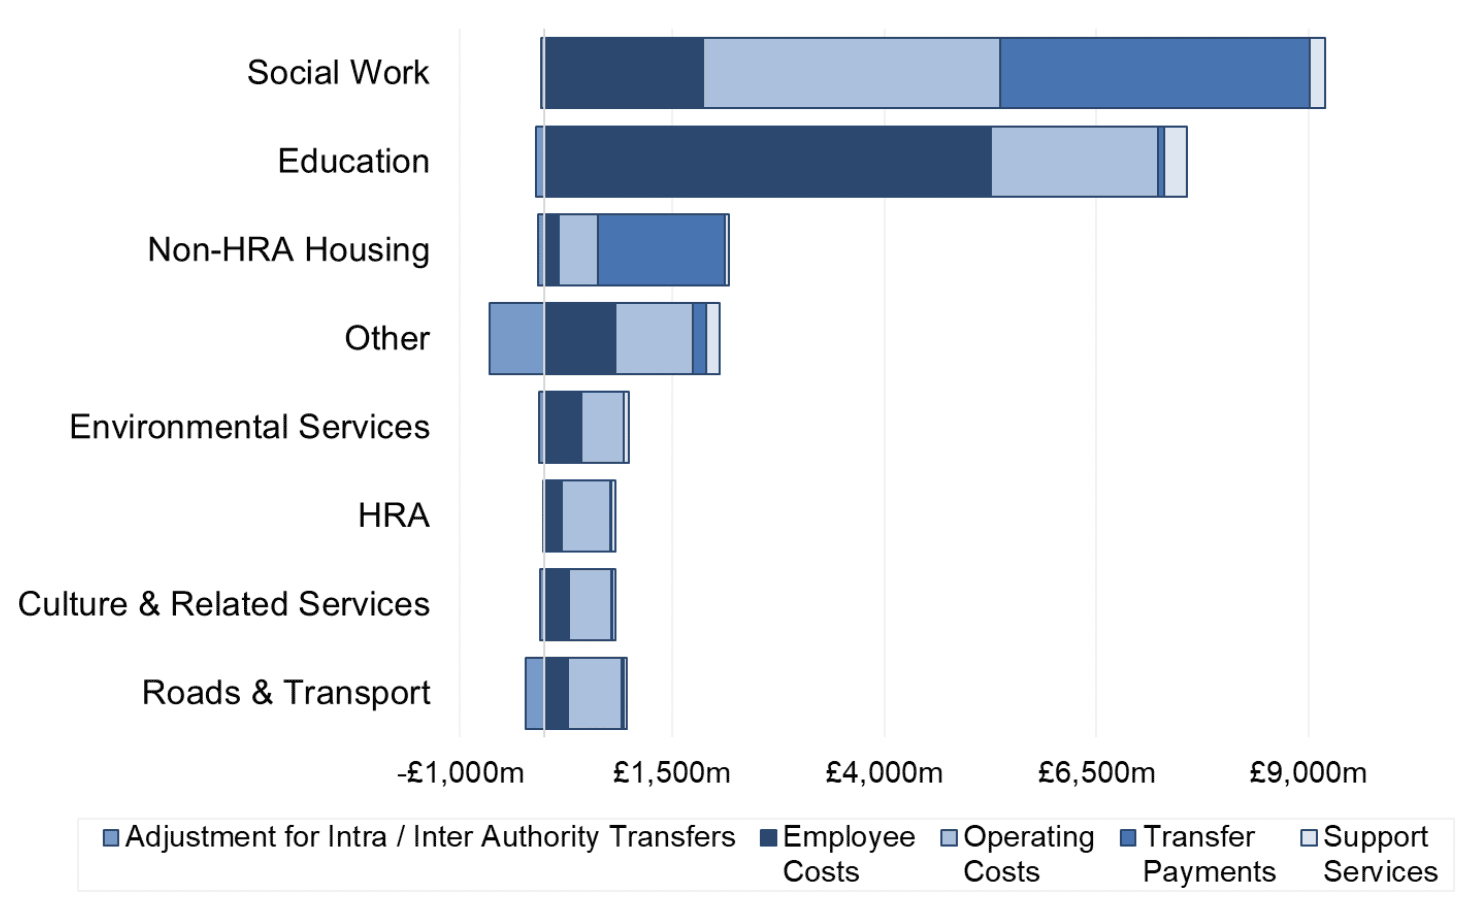 Bar chart showing the breakdown of gross service expenditure by service and by expenditure type. Education has a higher proportion of employee costs than other services – this is due to the higher number of staff employed within Education, in particular teachers. Social Work and Non-HRA Housing have high proportions of transfer payments which relates to amounts transferred to IJBs and the payment of Housing Benefits respectively. Other has the largest adjustment for intra / inter authority transfers which is due to Central Services and Trading Services having particularly high amounts of recharge income from other services.